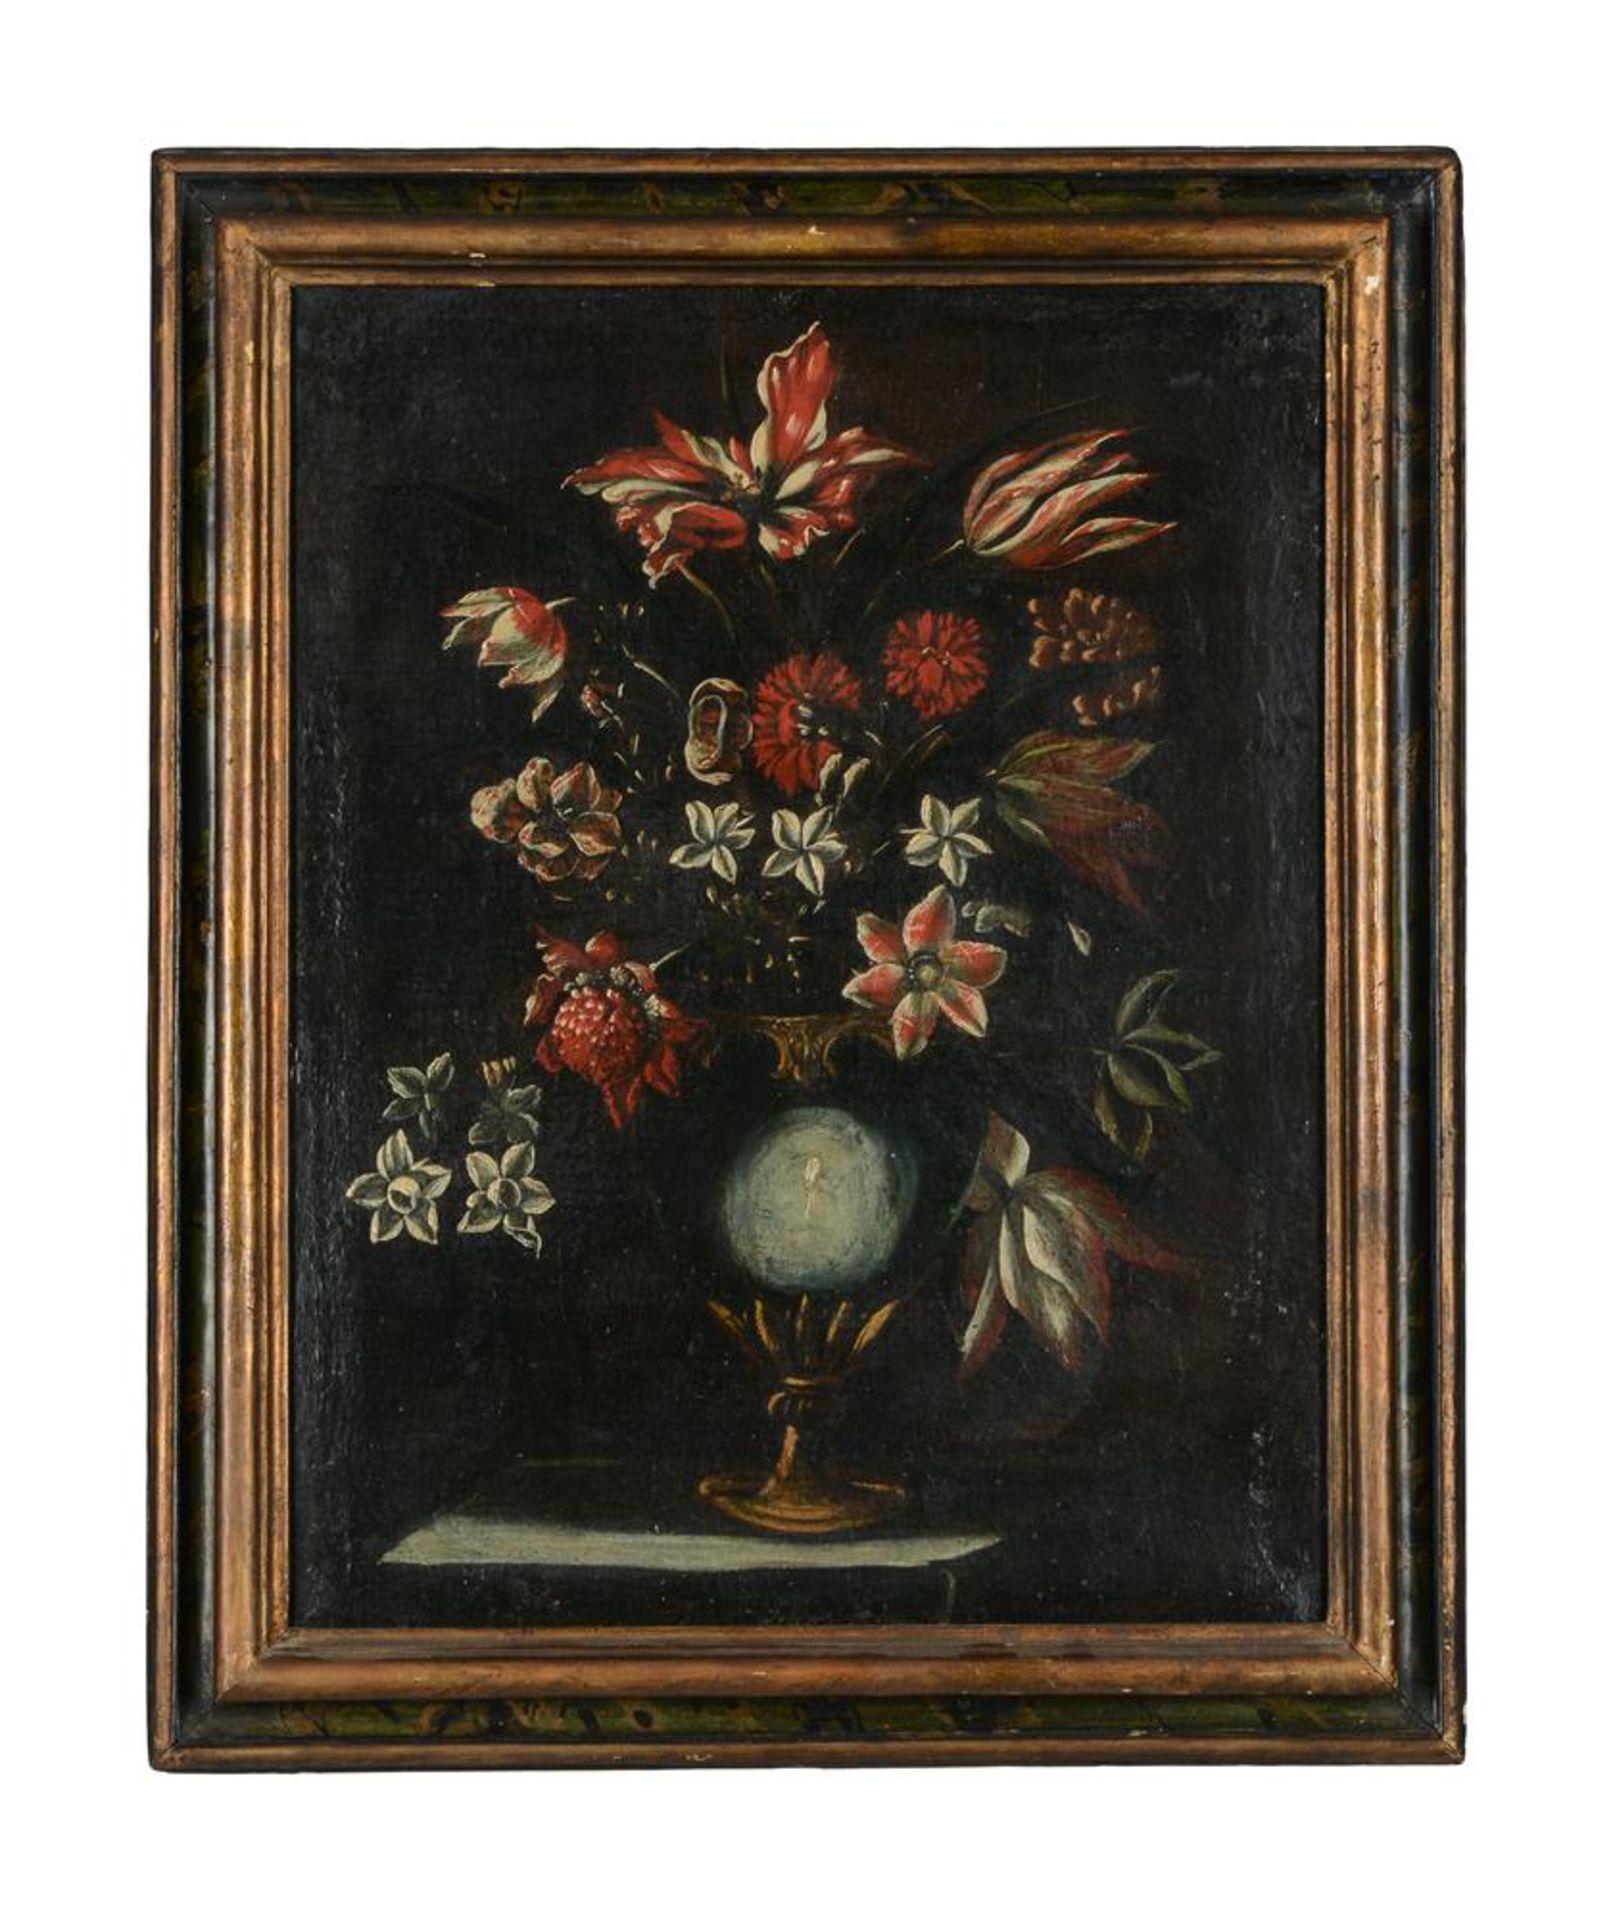 ITALIAN SCHOOL (17TH CENTURY), A PAIR OF STILL LIFES WITH TULIPS - Image 3 of 5